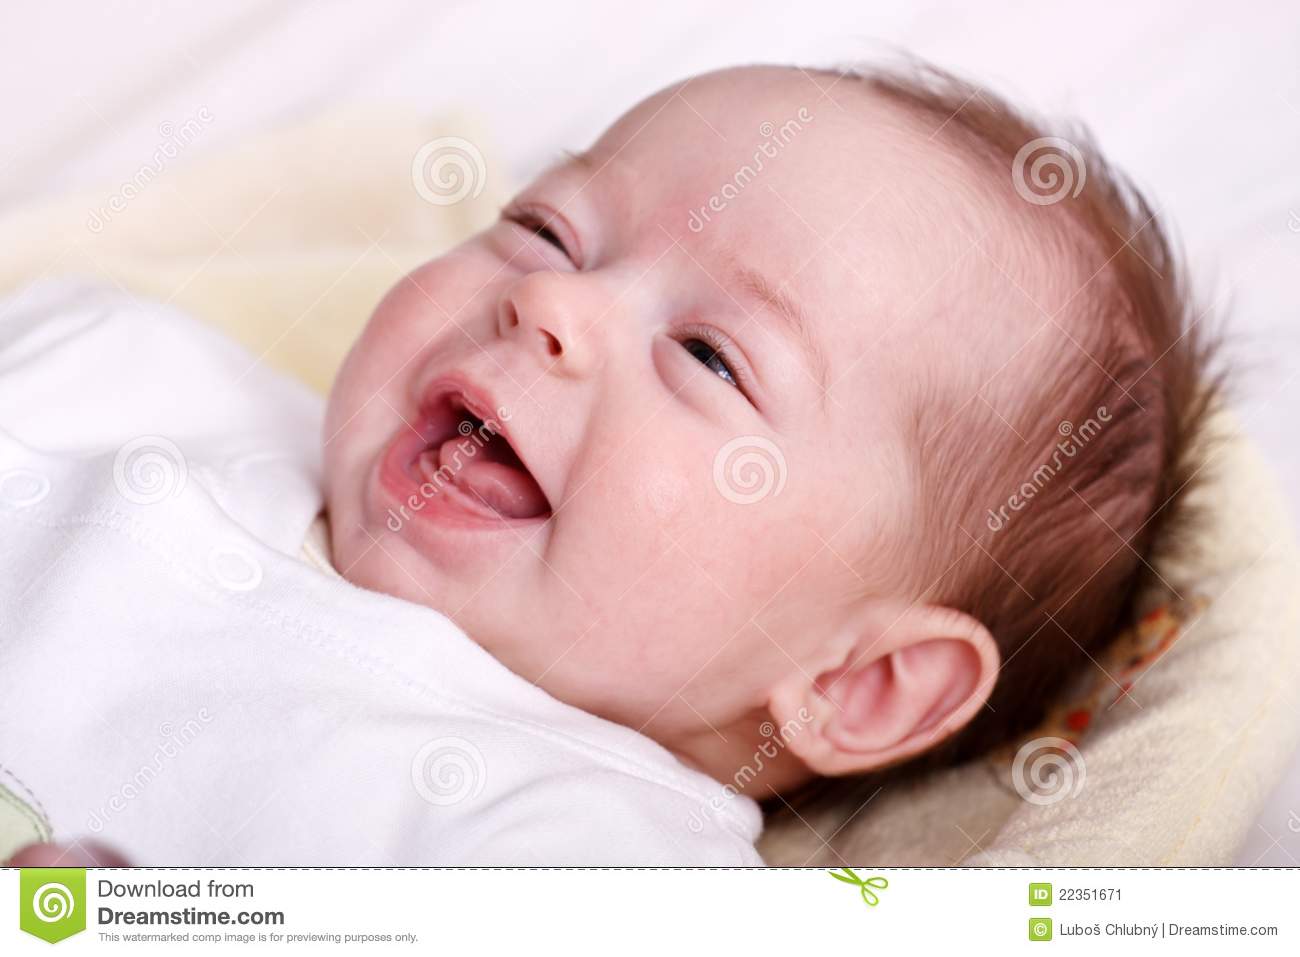 Baby Girl Laughing With Toothless Smile Stock Image   Image  22351671